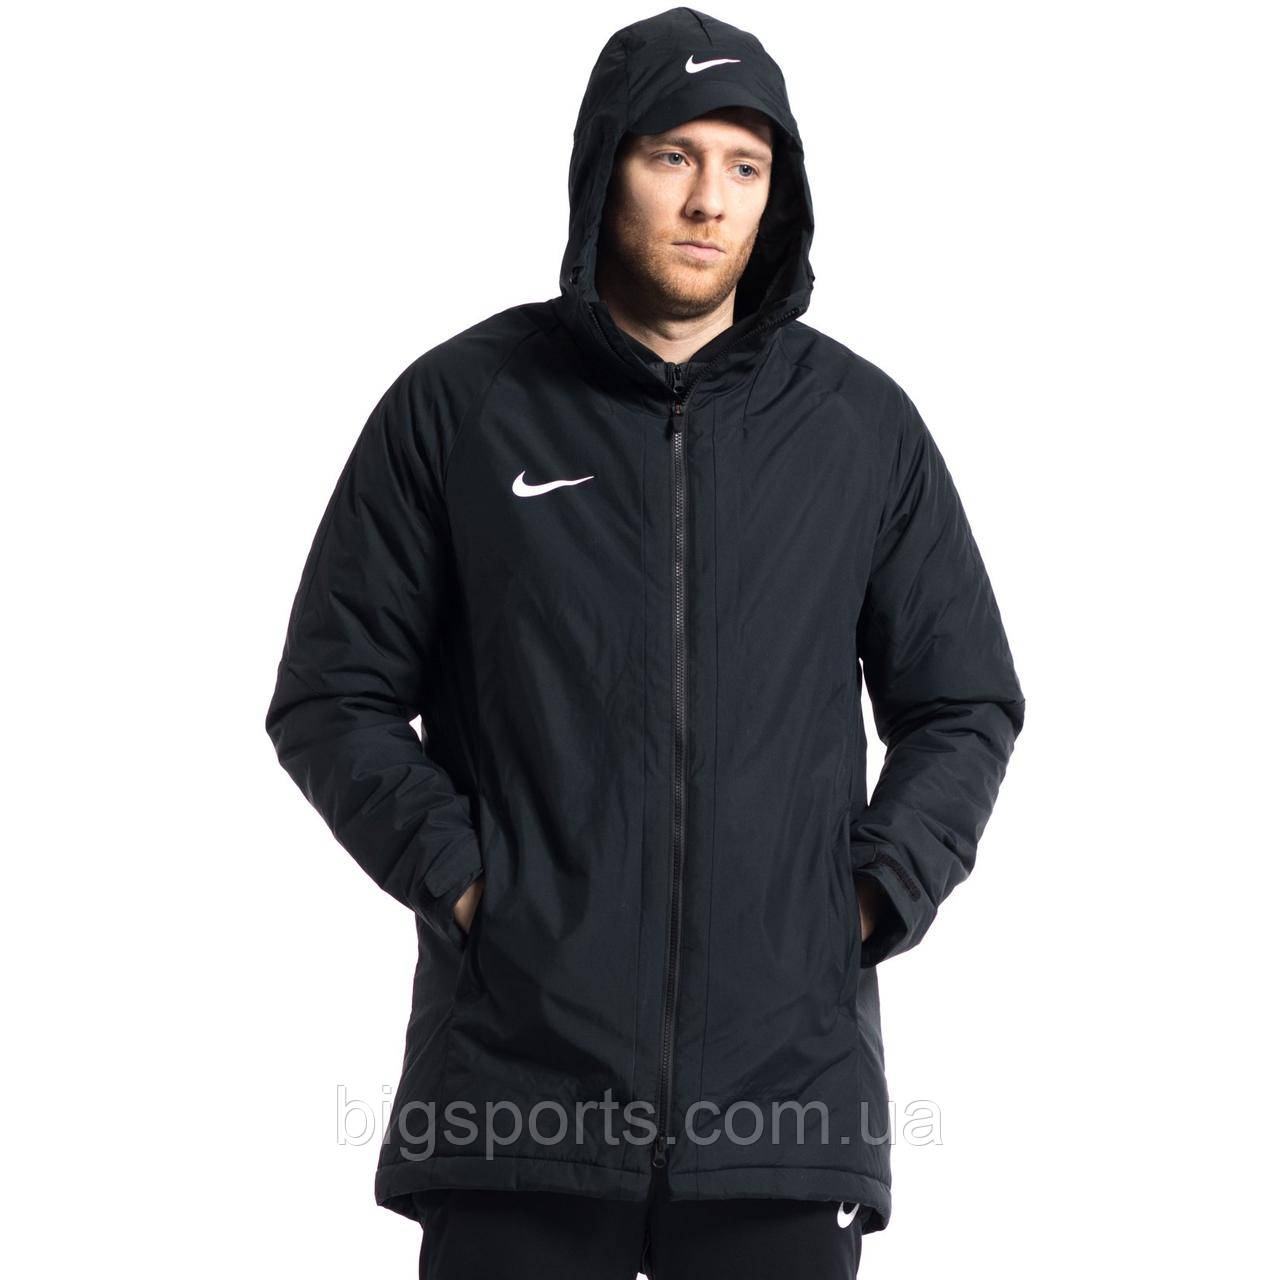 nike dry academy 18 sdf Promotions